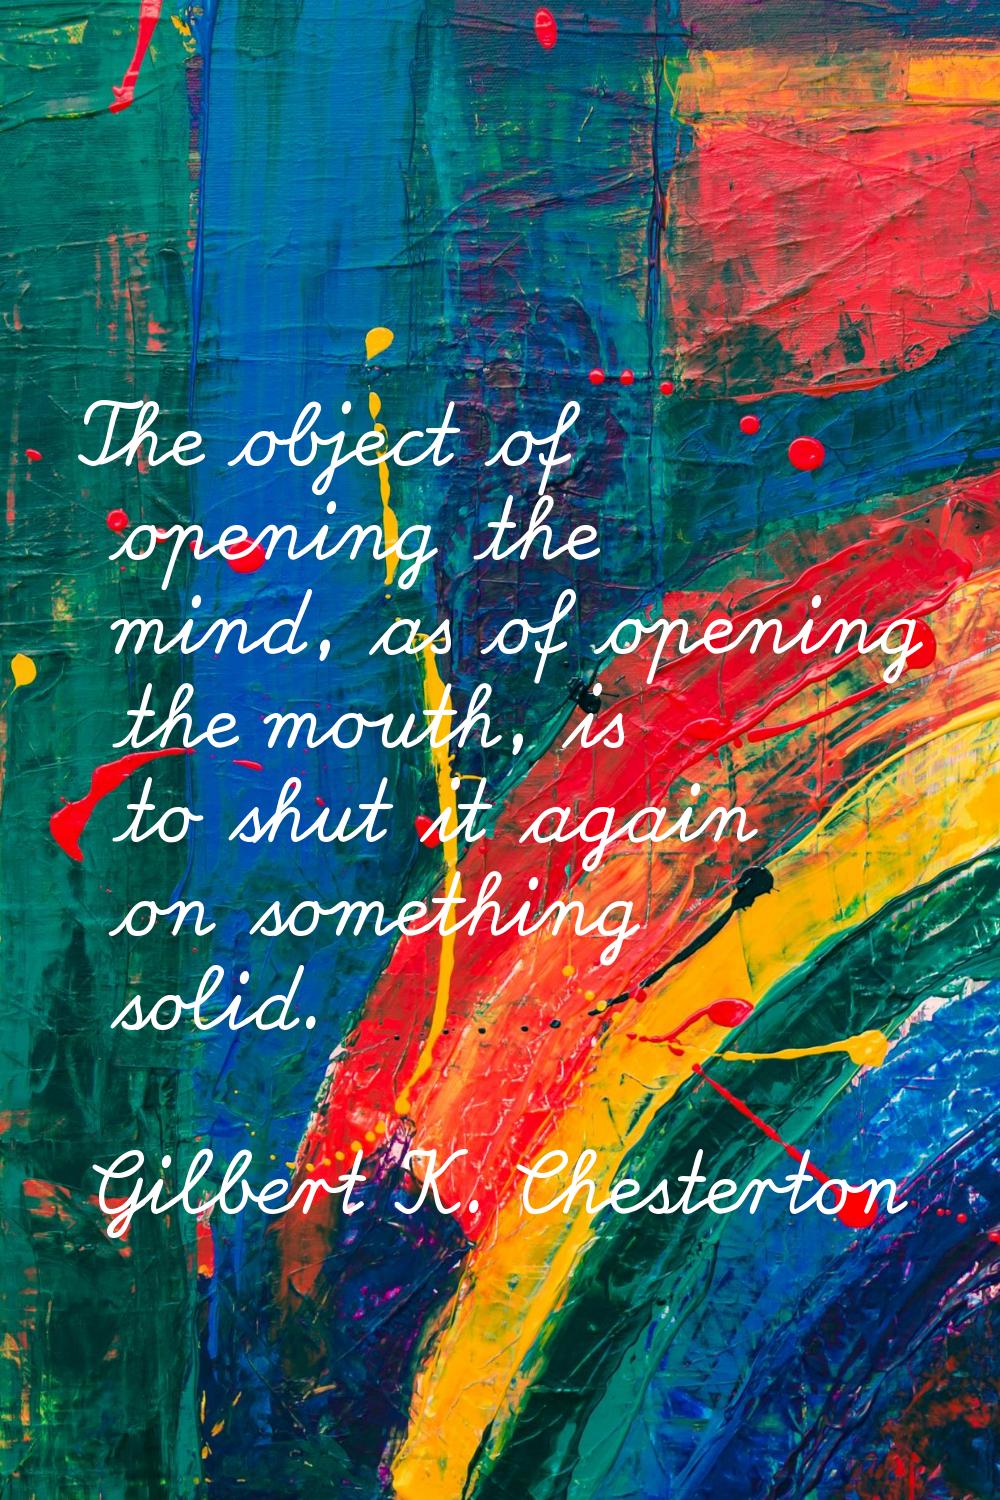 The object of opening the mind, as of opening the mouth, is to shut it again on something solid.